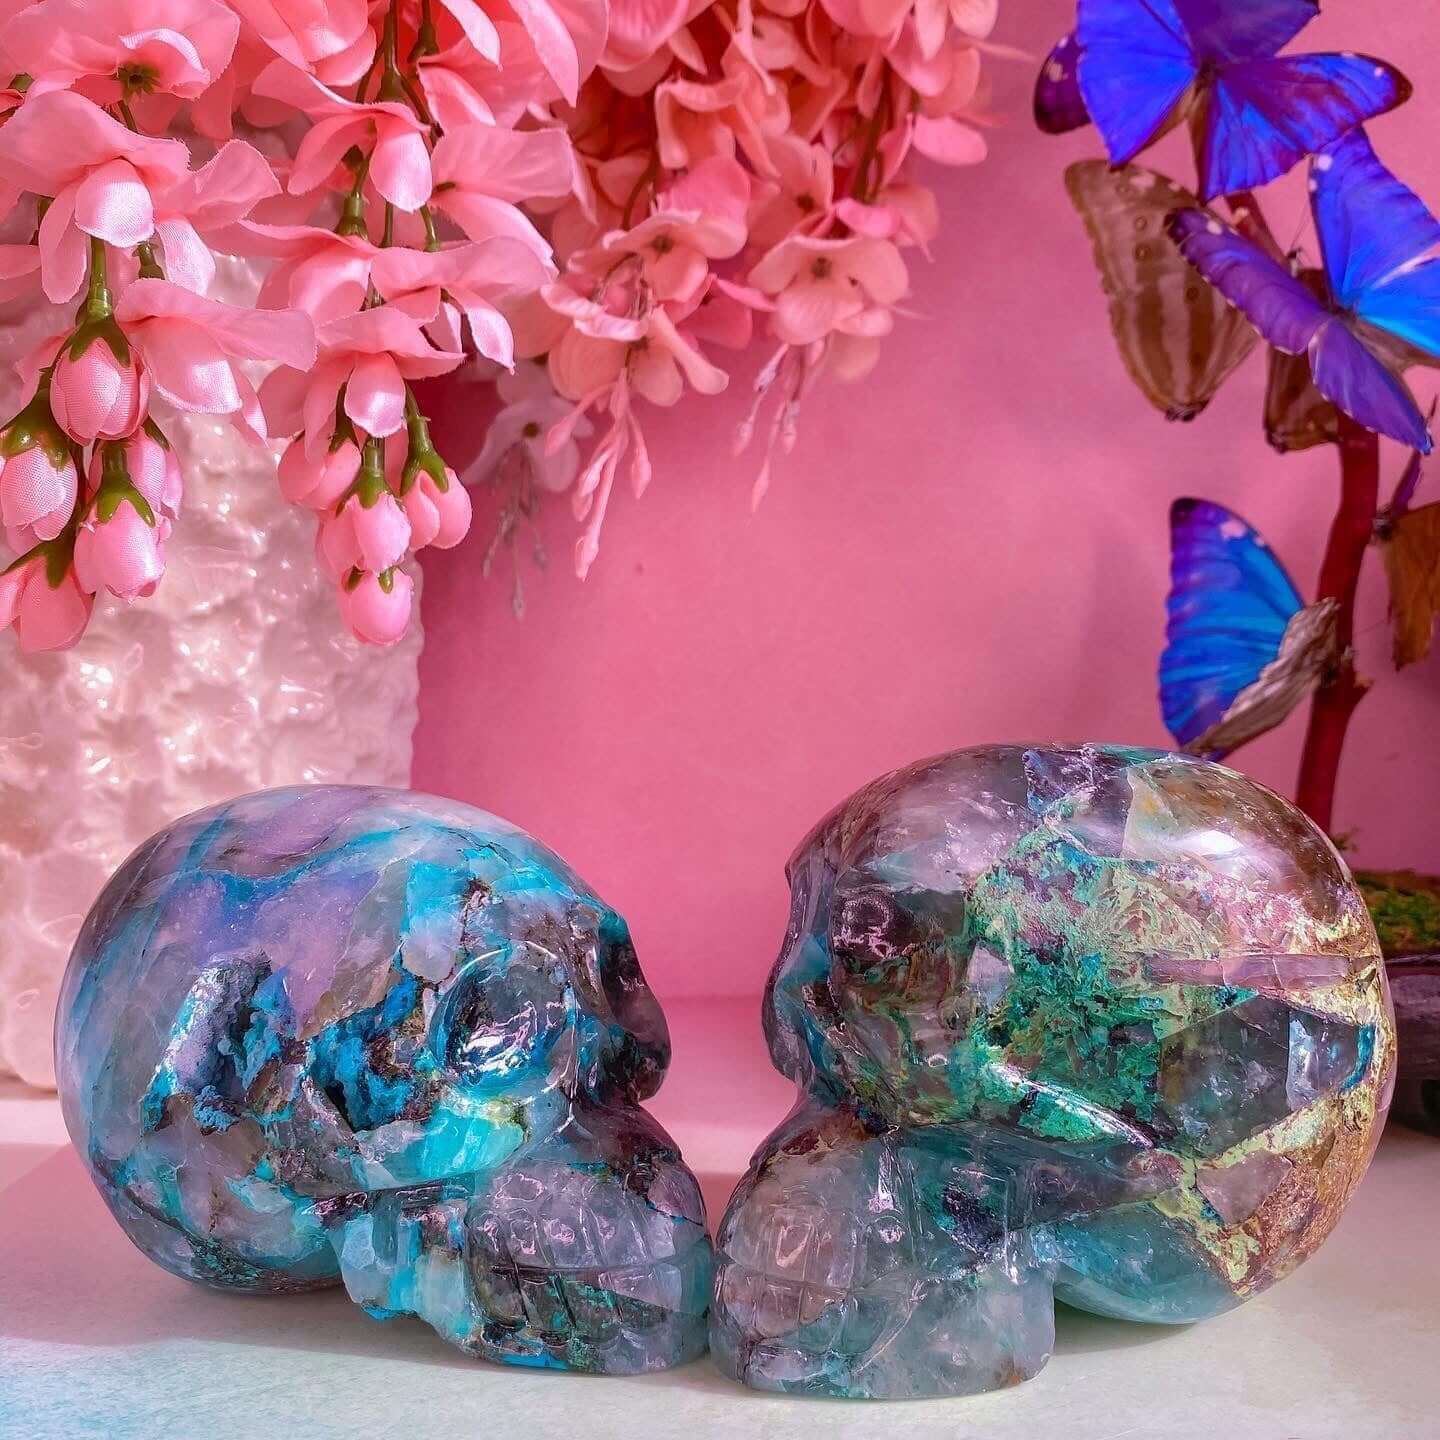 Crystal Skulls: How They Work And How To Use Them